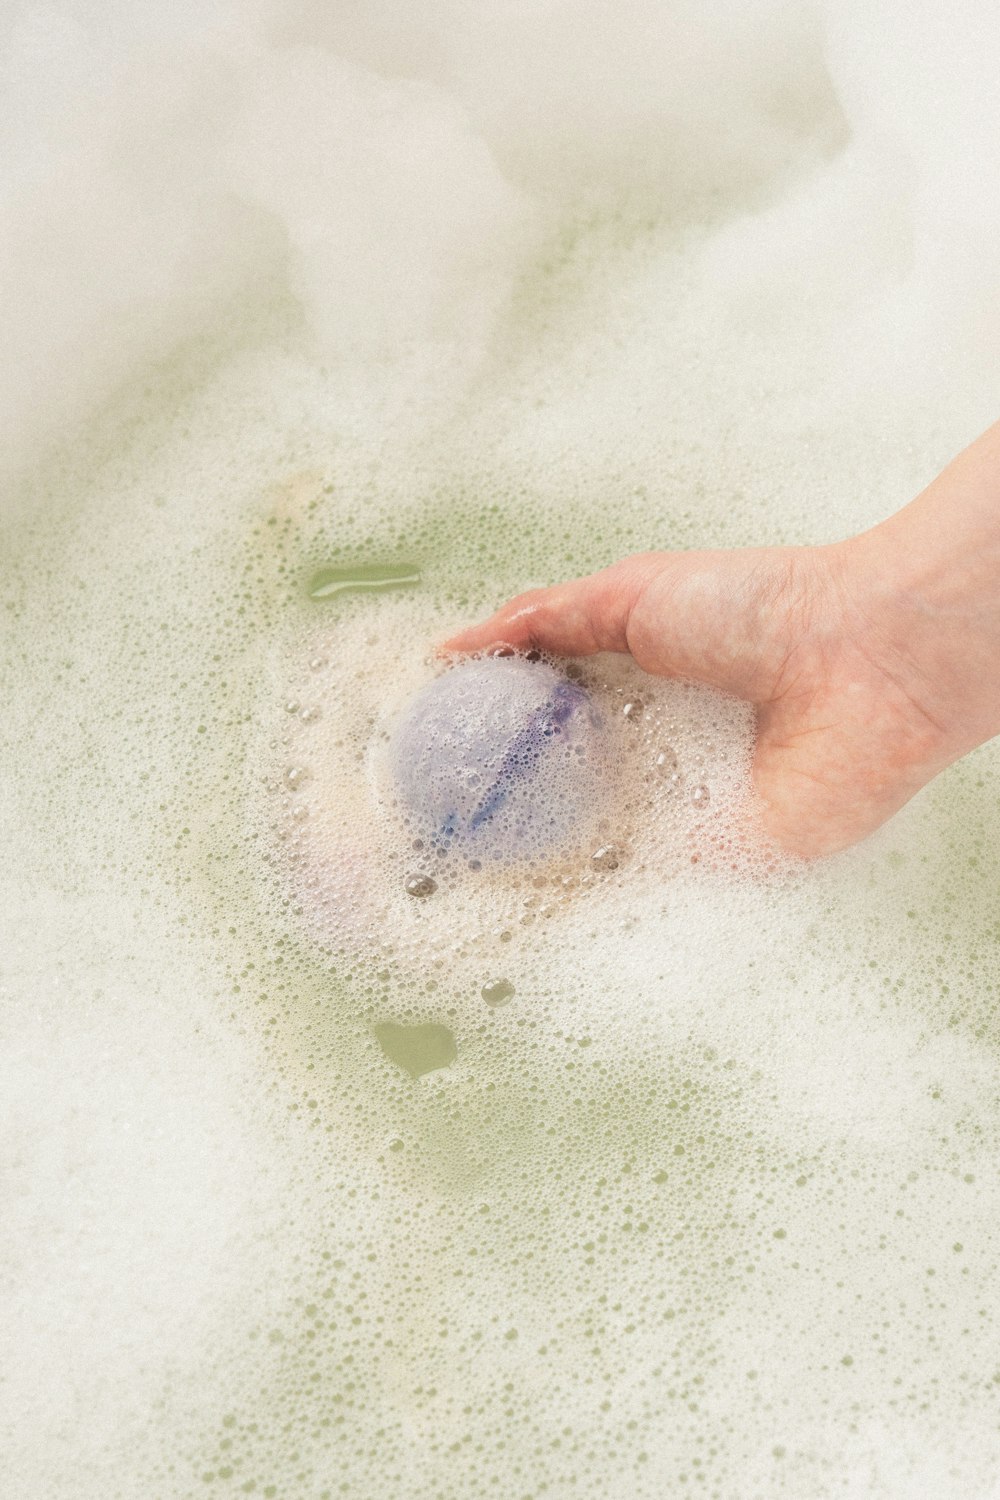 a person's hand in a bath of water